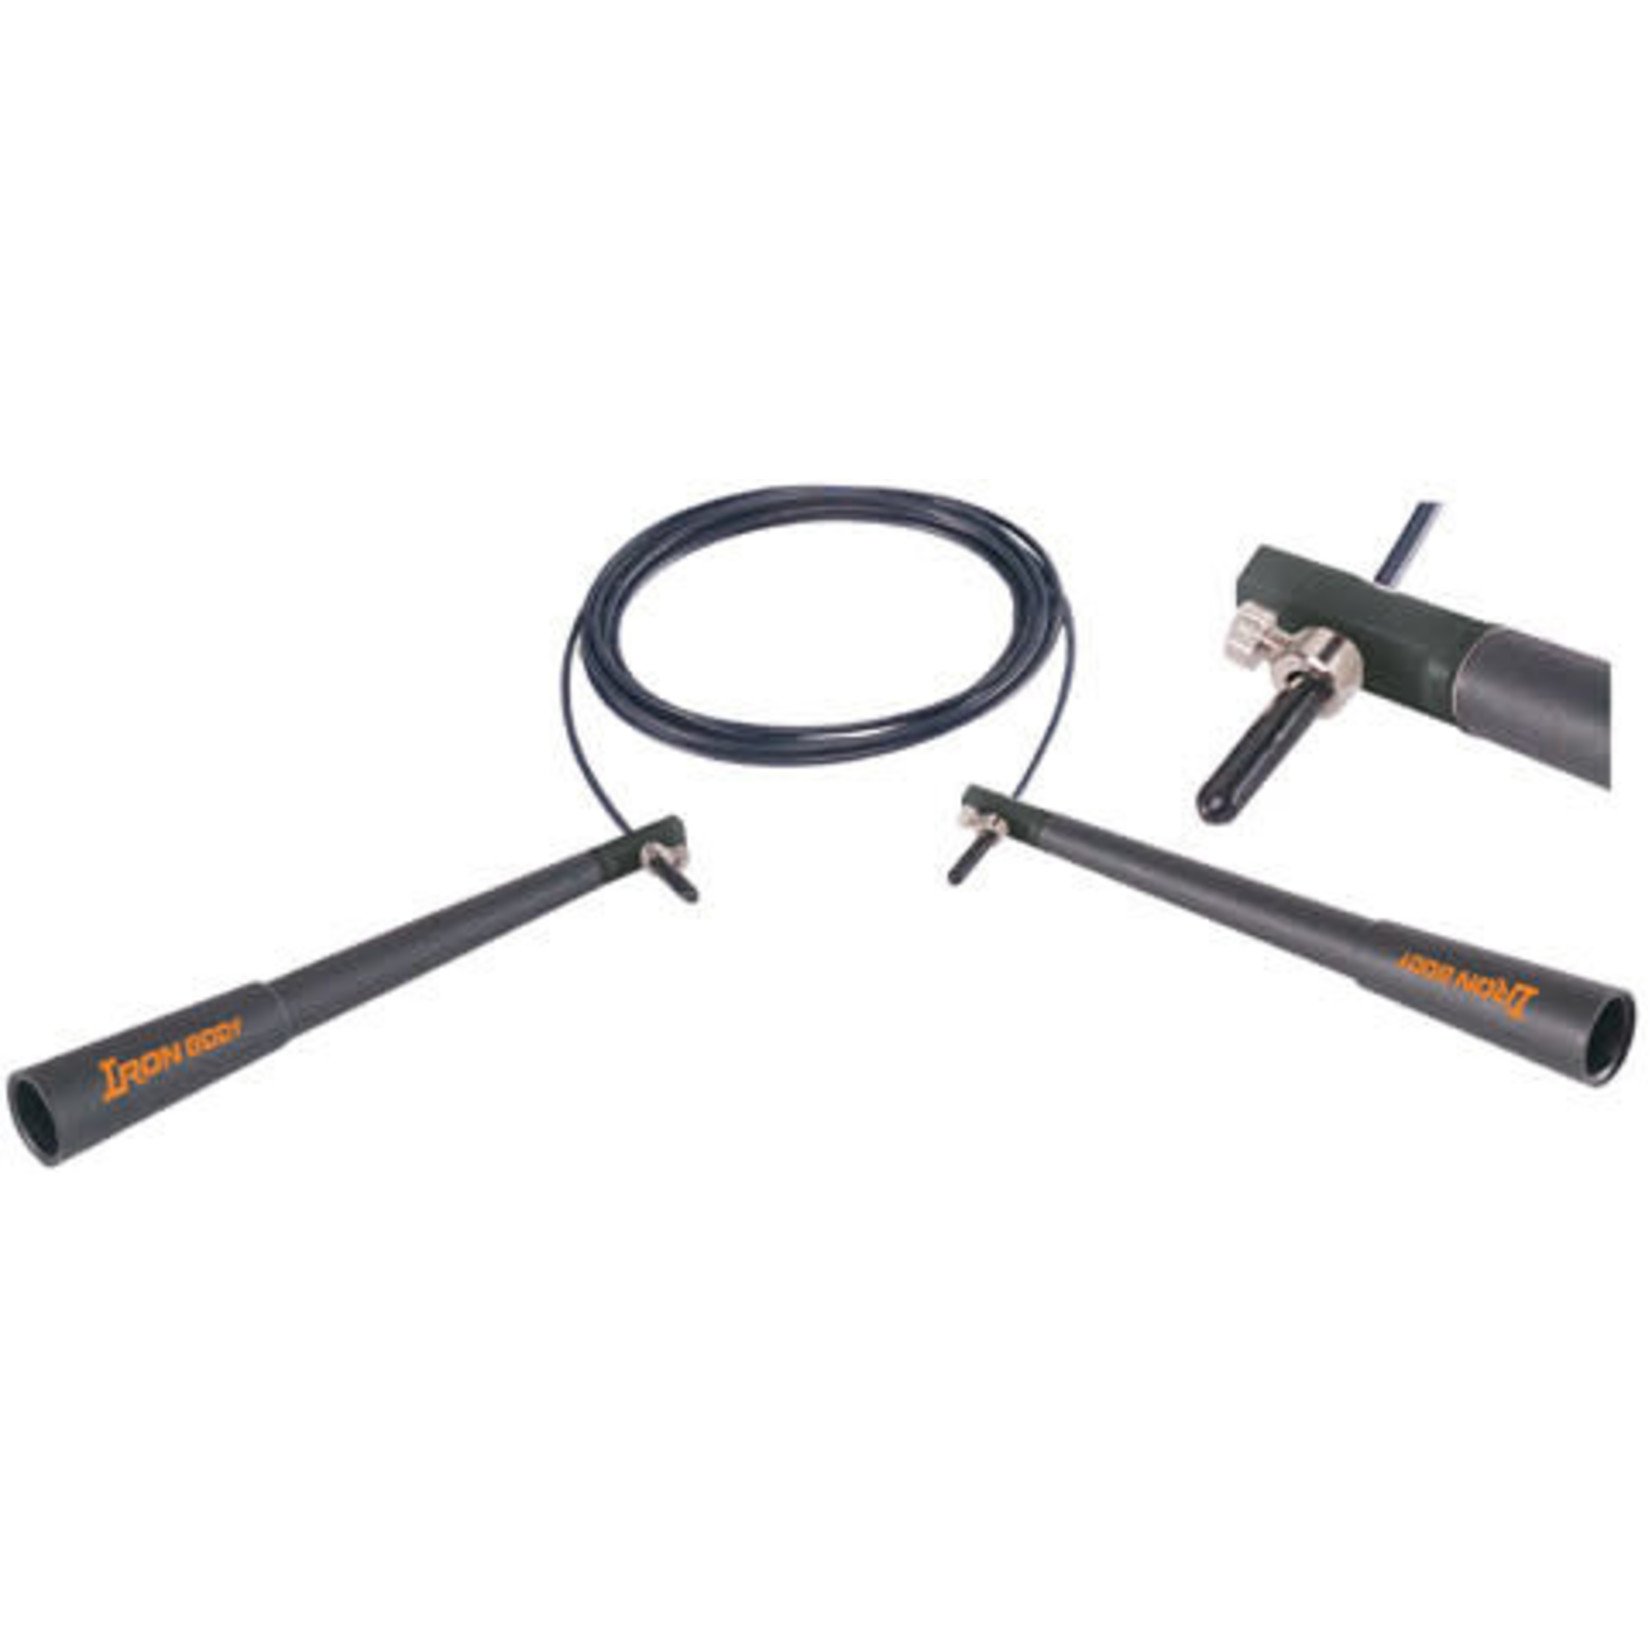 High Speed Cable Jump Rope